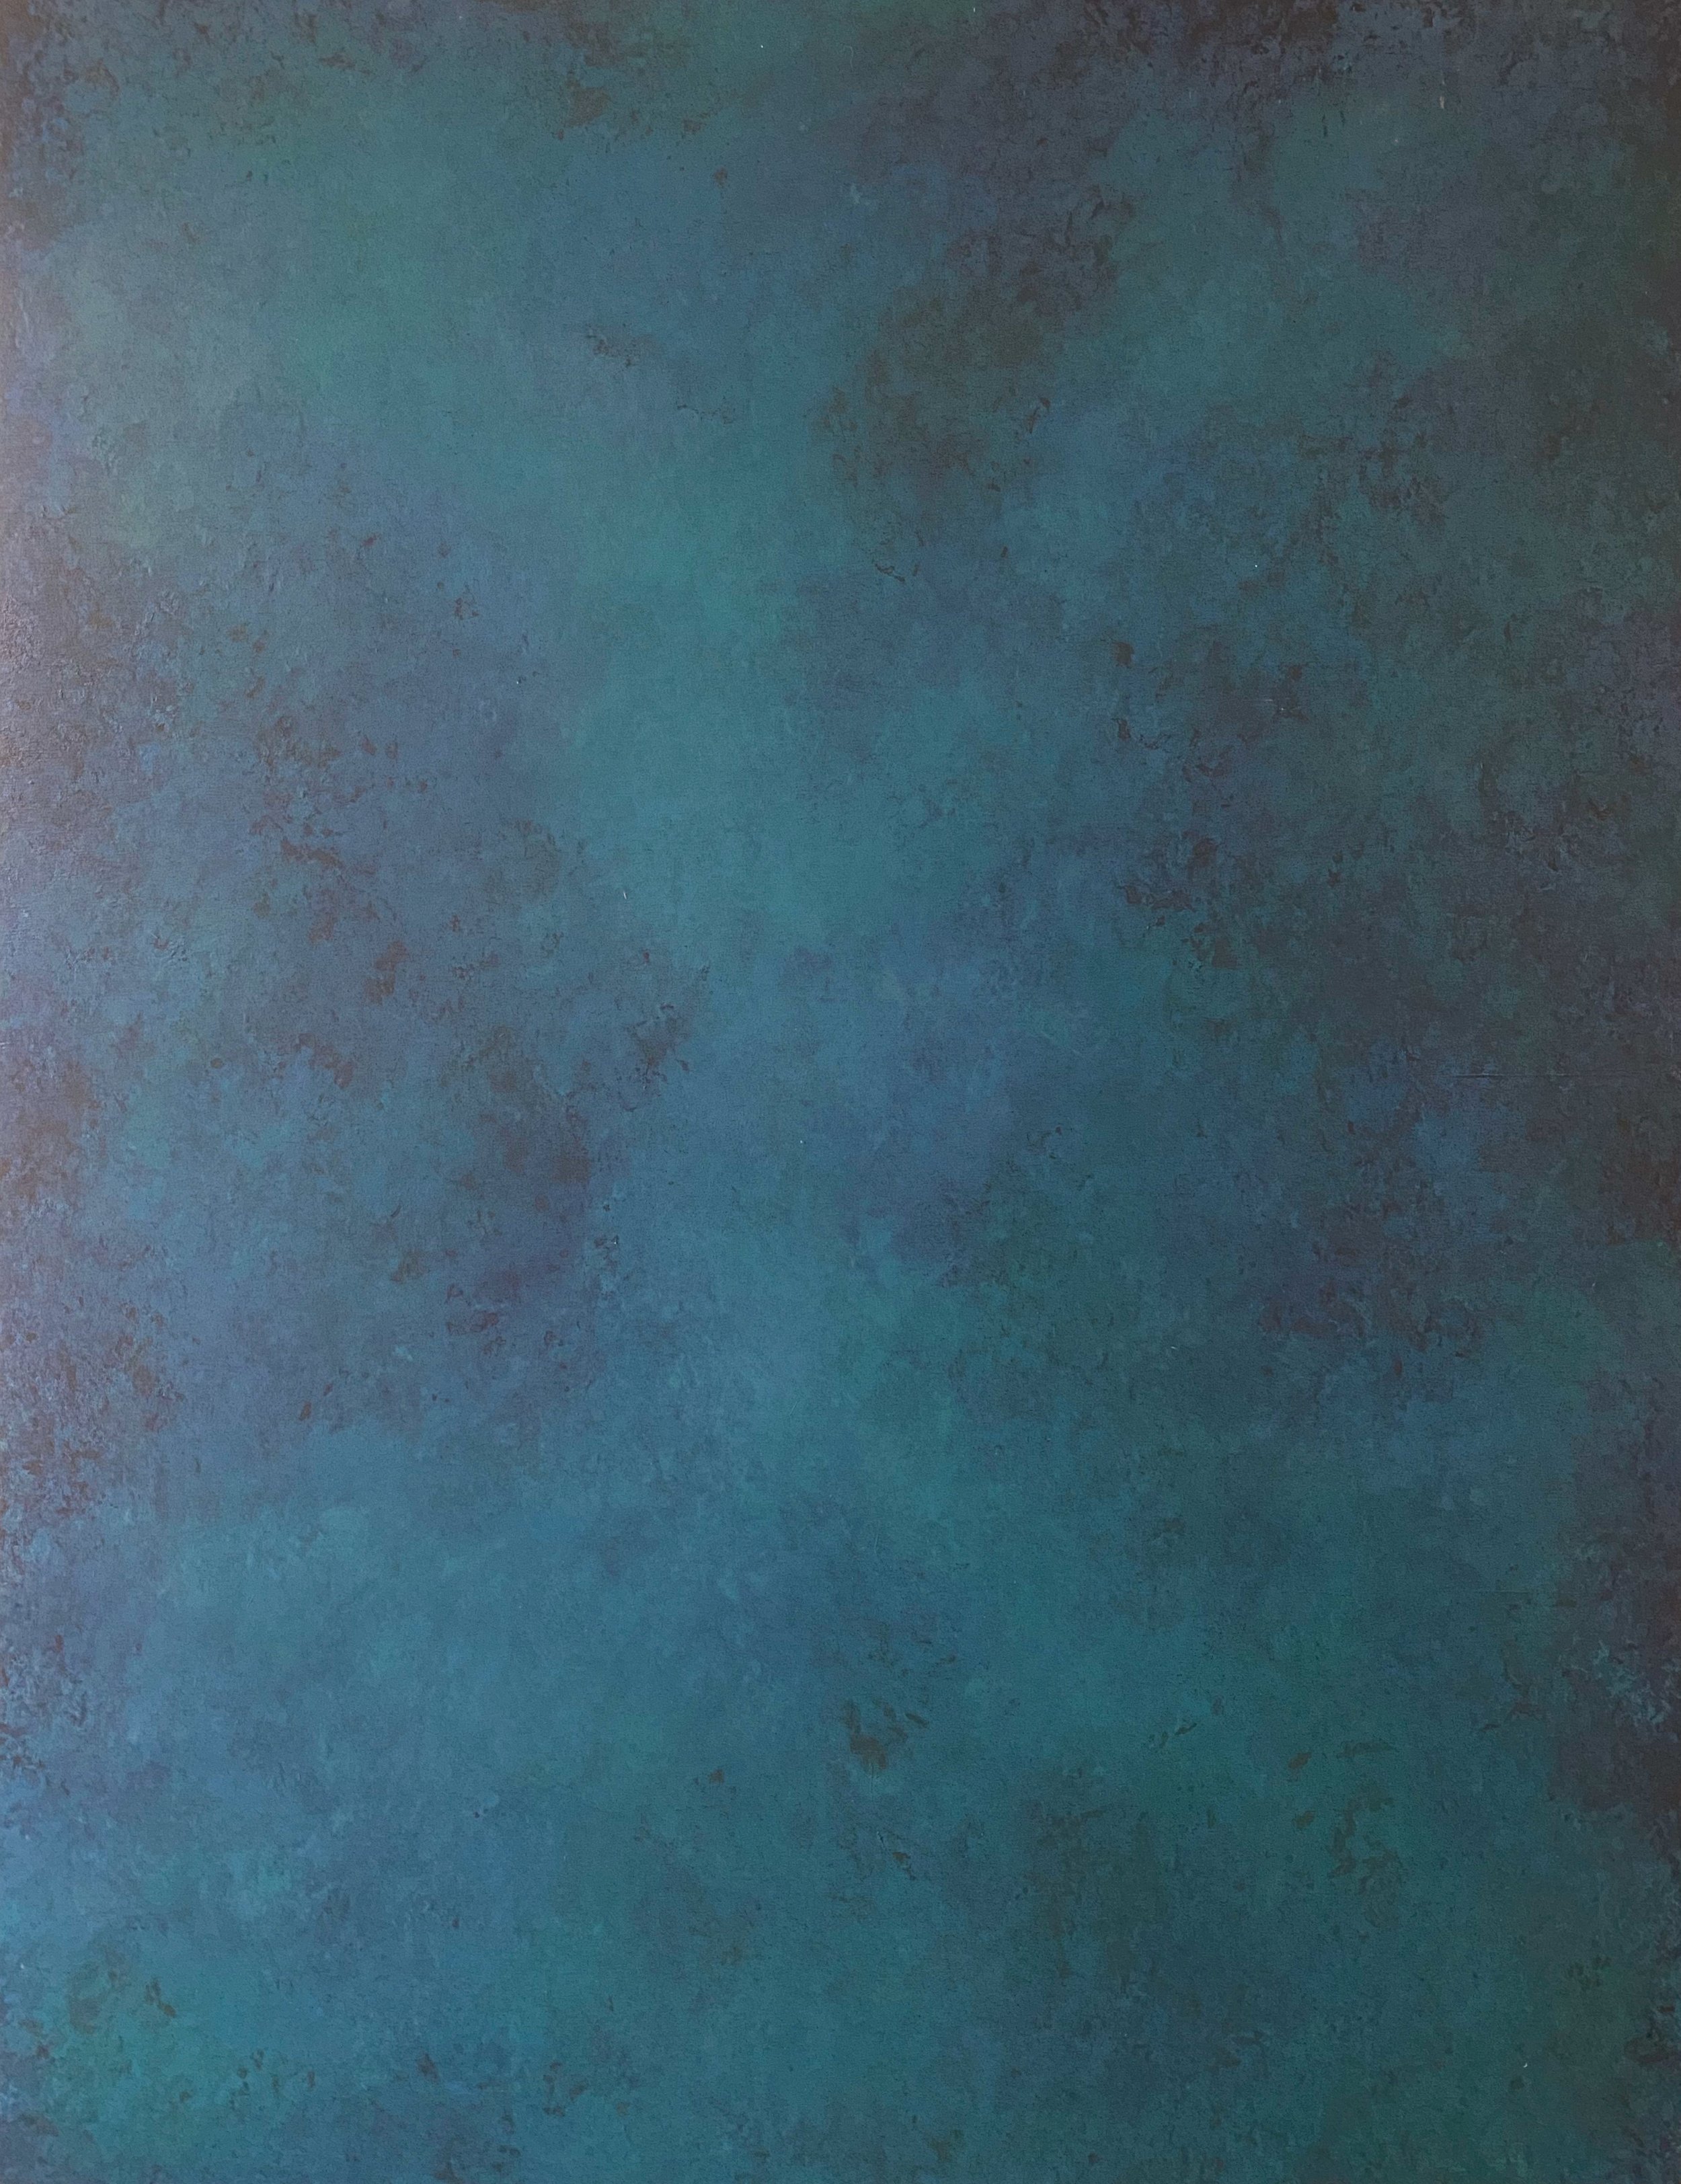 Orion 36" X 48" $125